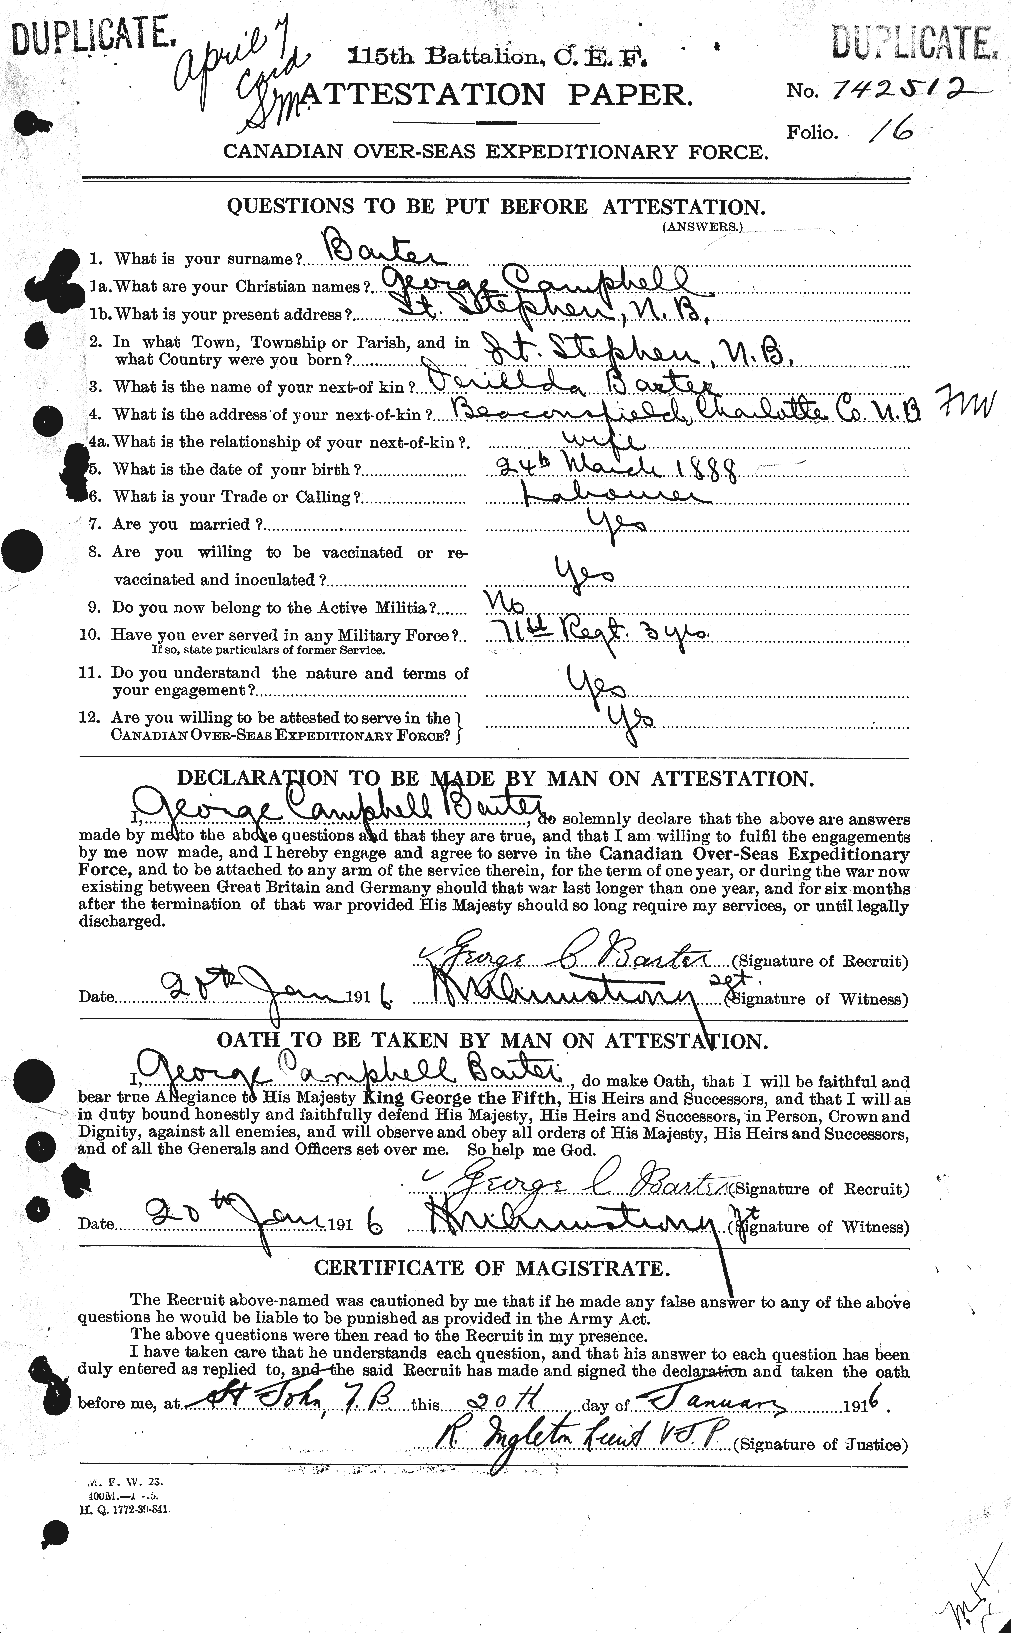 Personnel Records of the First World War - CEF 227690a